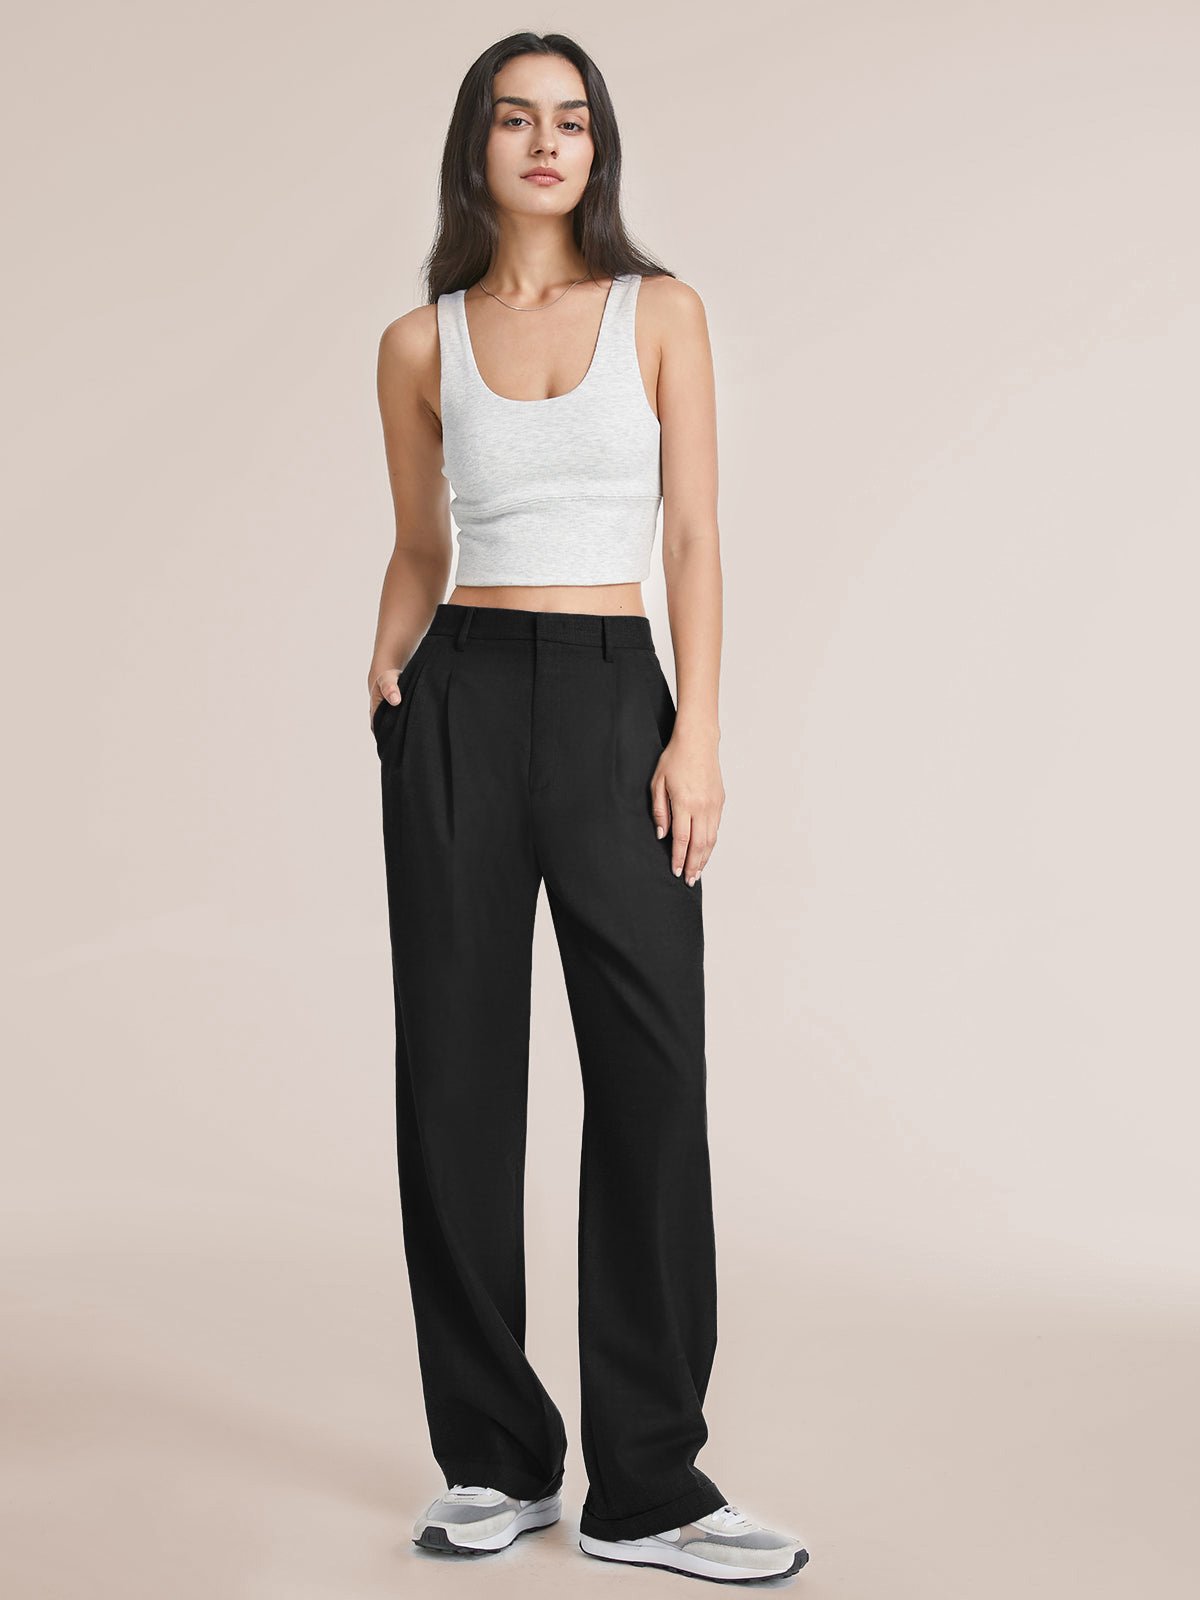 🔥Limited Time Sale 70% OFF🎉 THE EFFORTLESS TAILORED WIDE LEG PANTS (BUY 2 FREE SHIPPING)📦